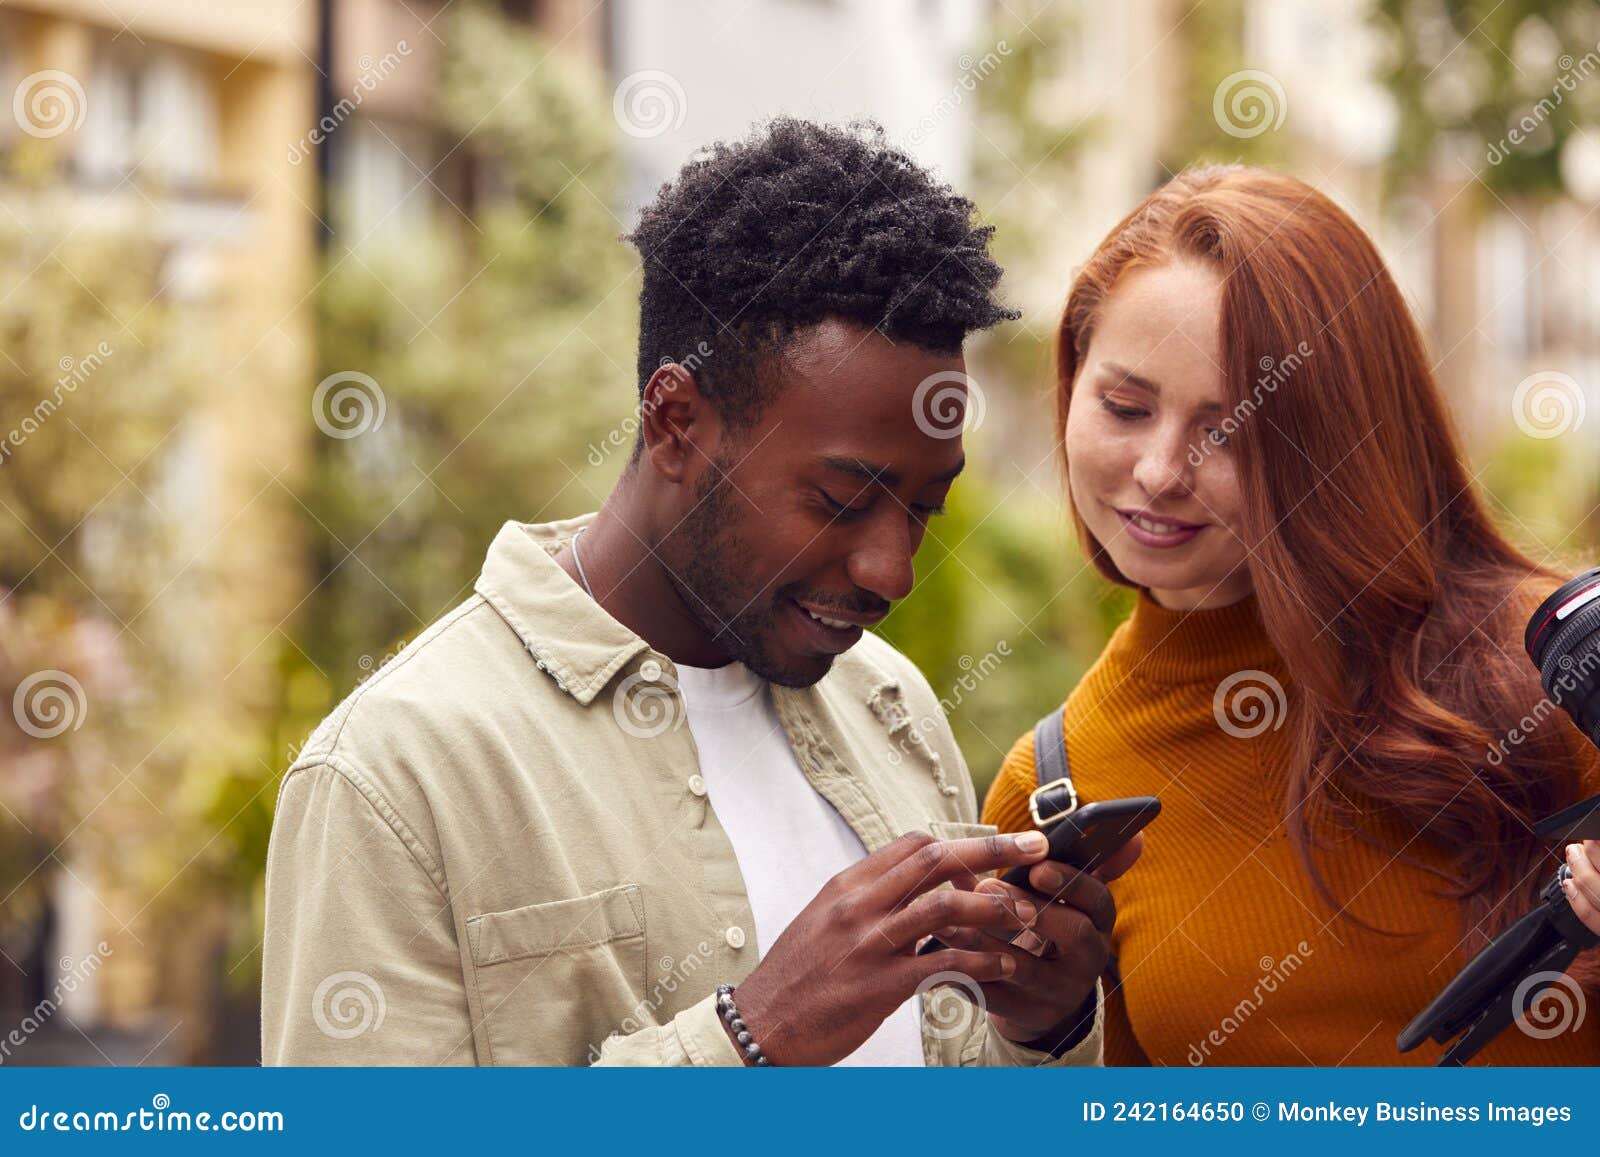 young couple travelling through city together vlogging with camera looking at mobile phone